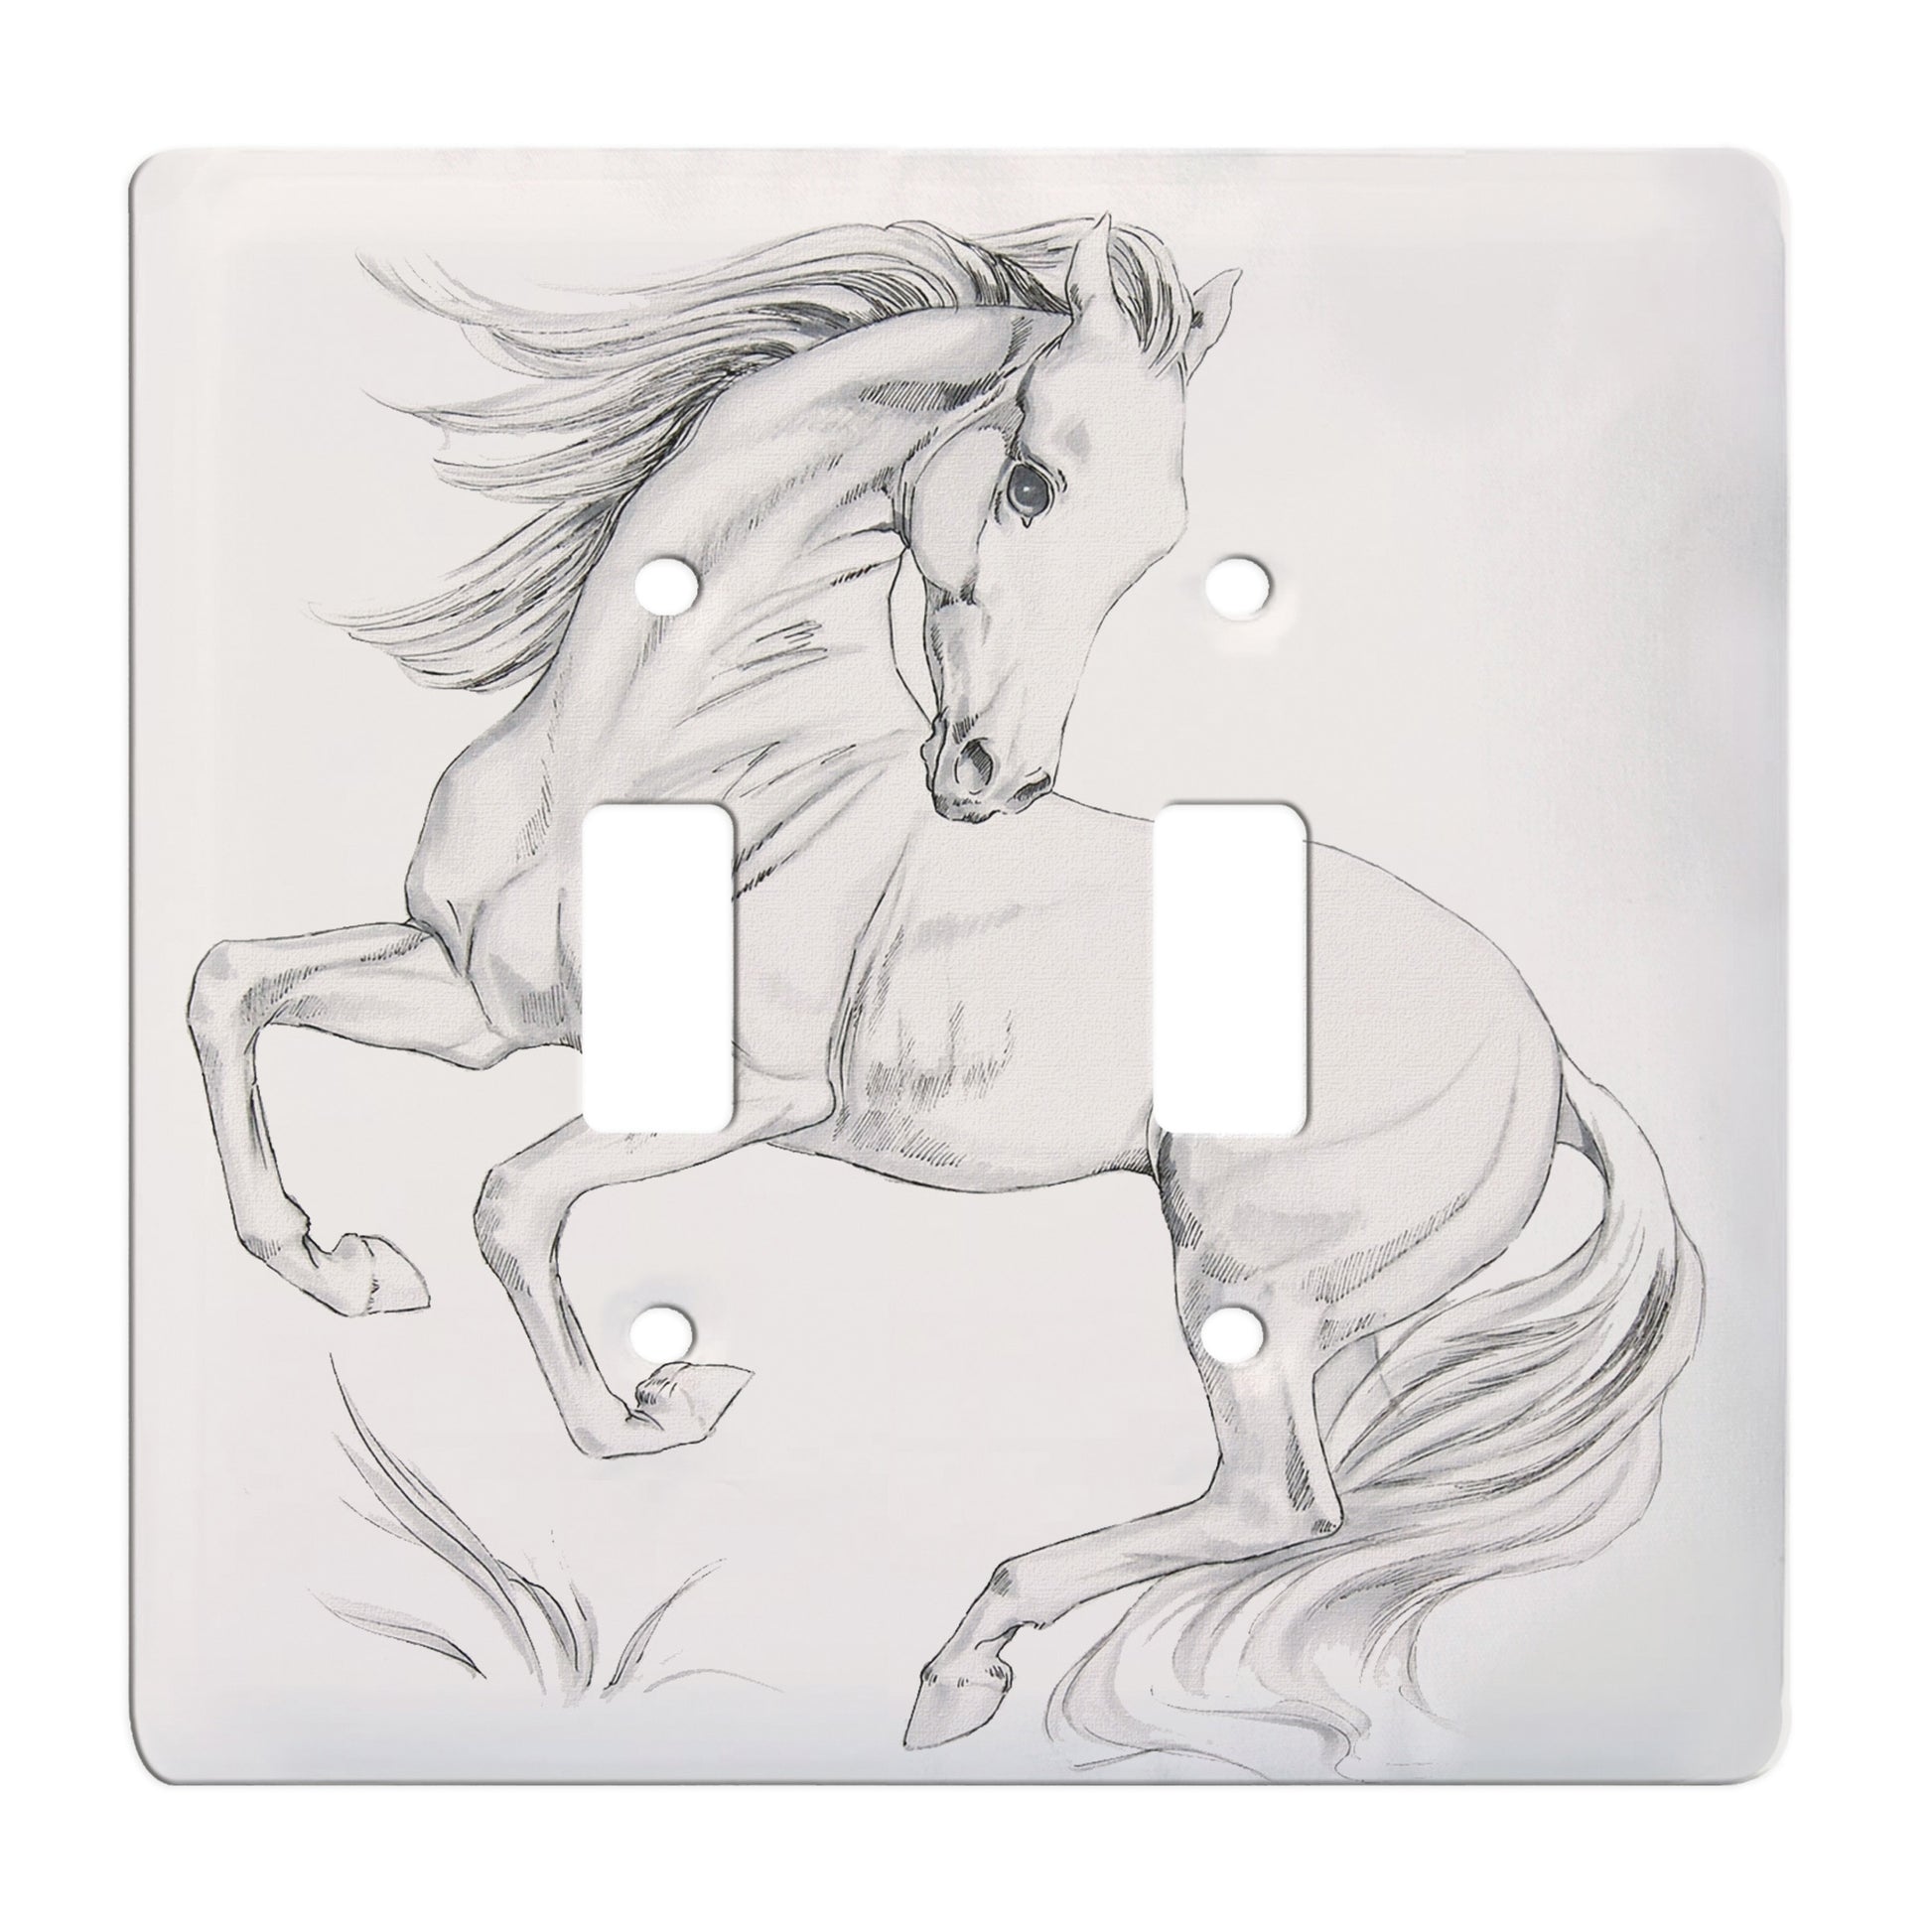 ceramic double toggle switch plate featuring illustrative graphic of a horse